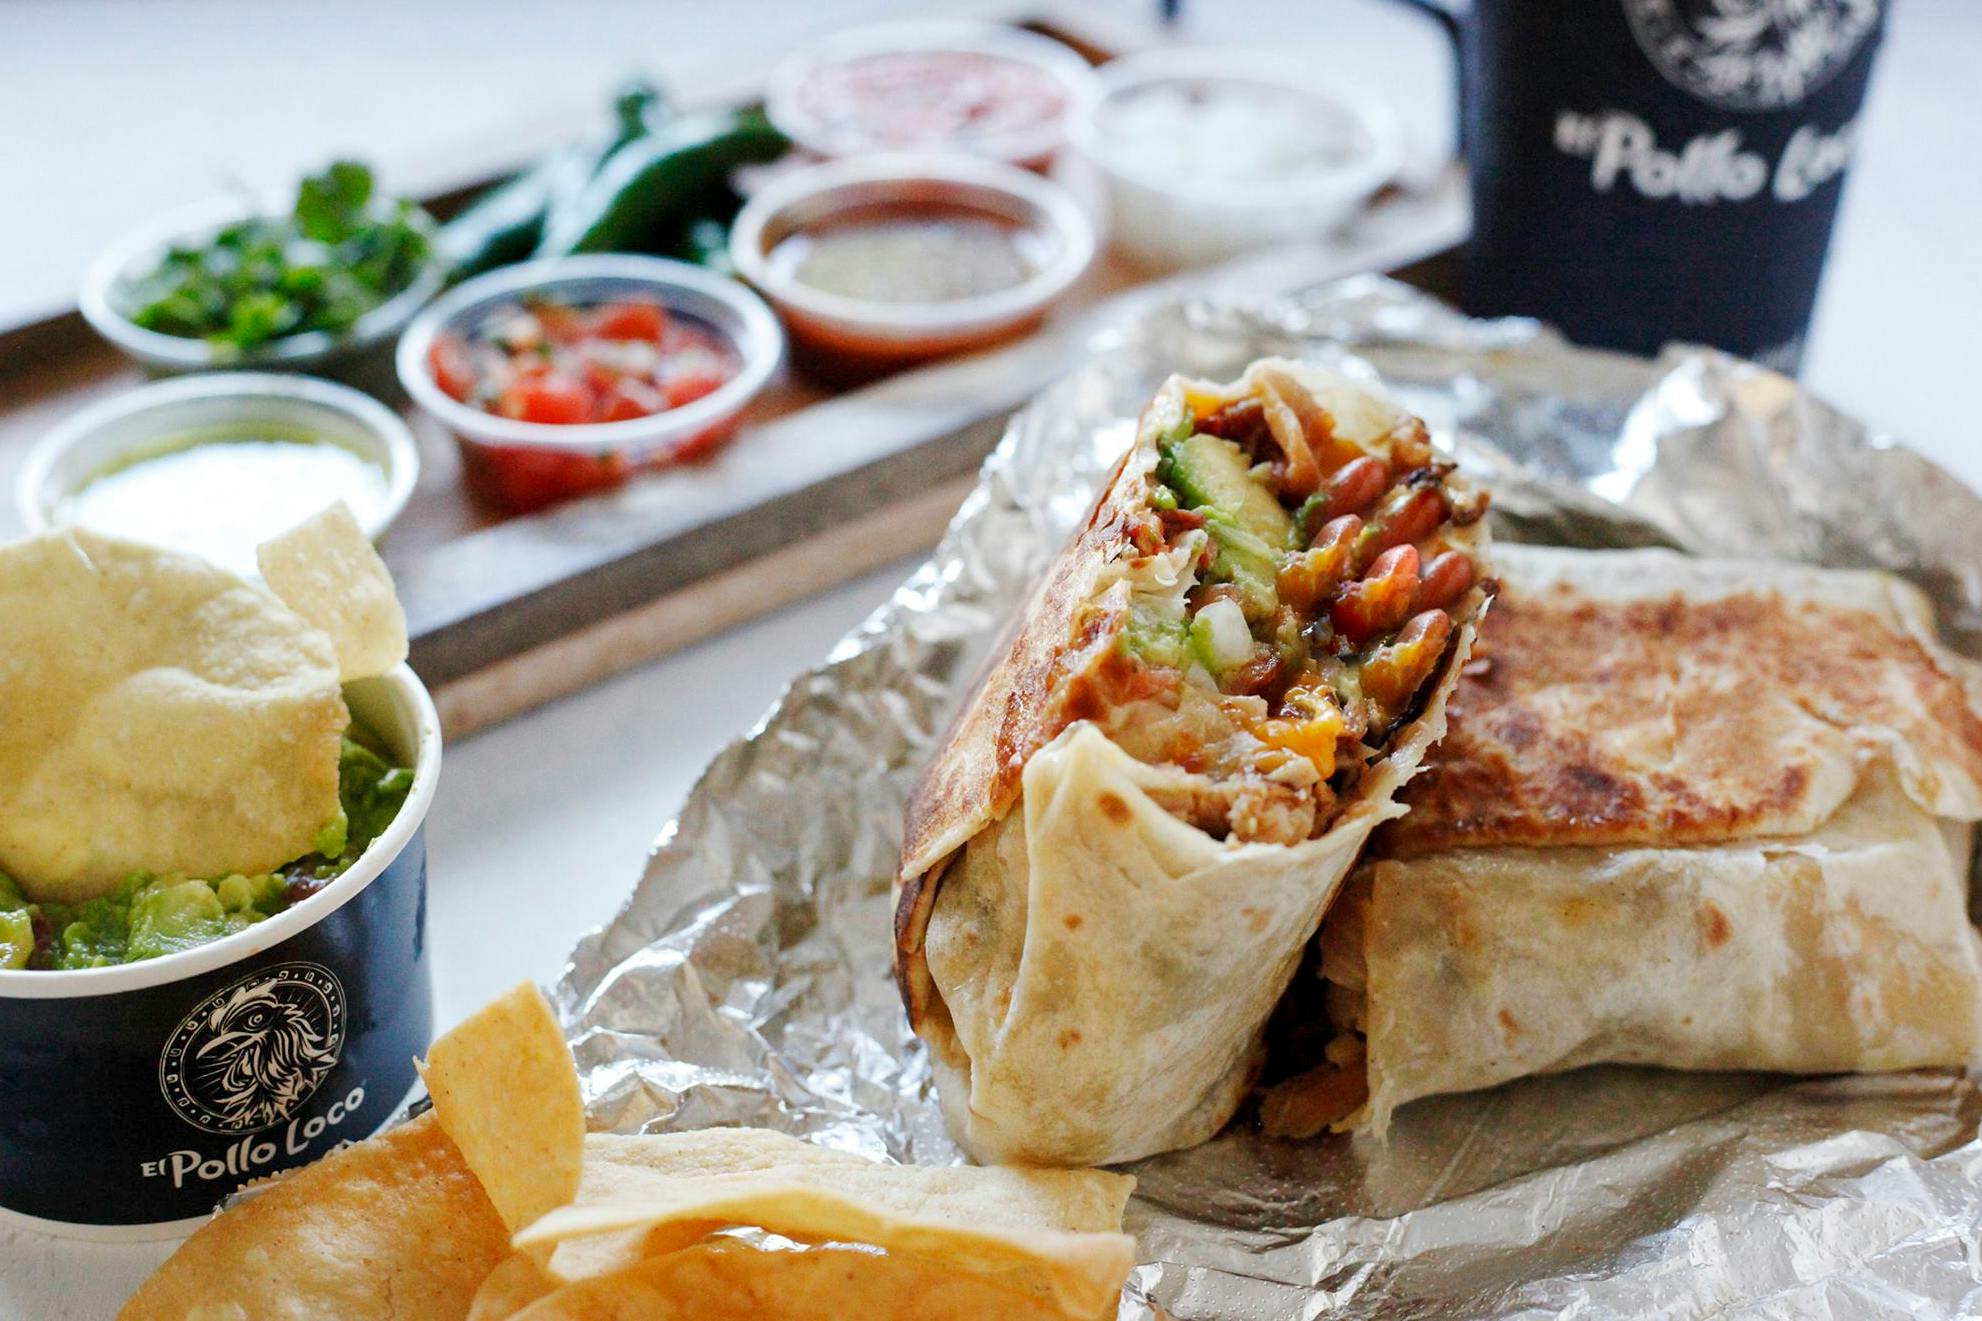 A burrito from El Pollo Loco, cut in half, sitting on foil next to a tray of dipping cups with salsa, a cup of guacamole with a chip in it, and a drink cup.